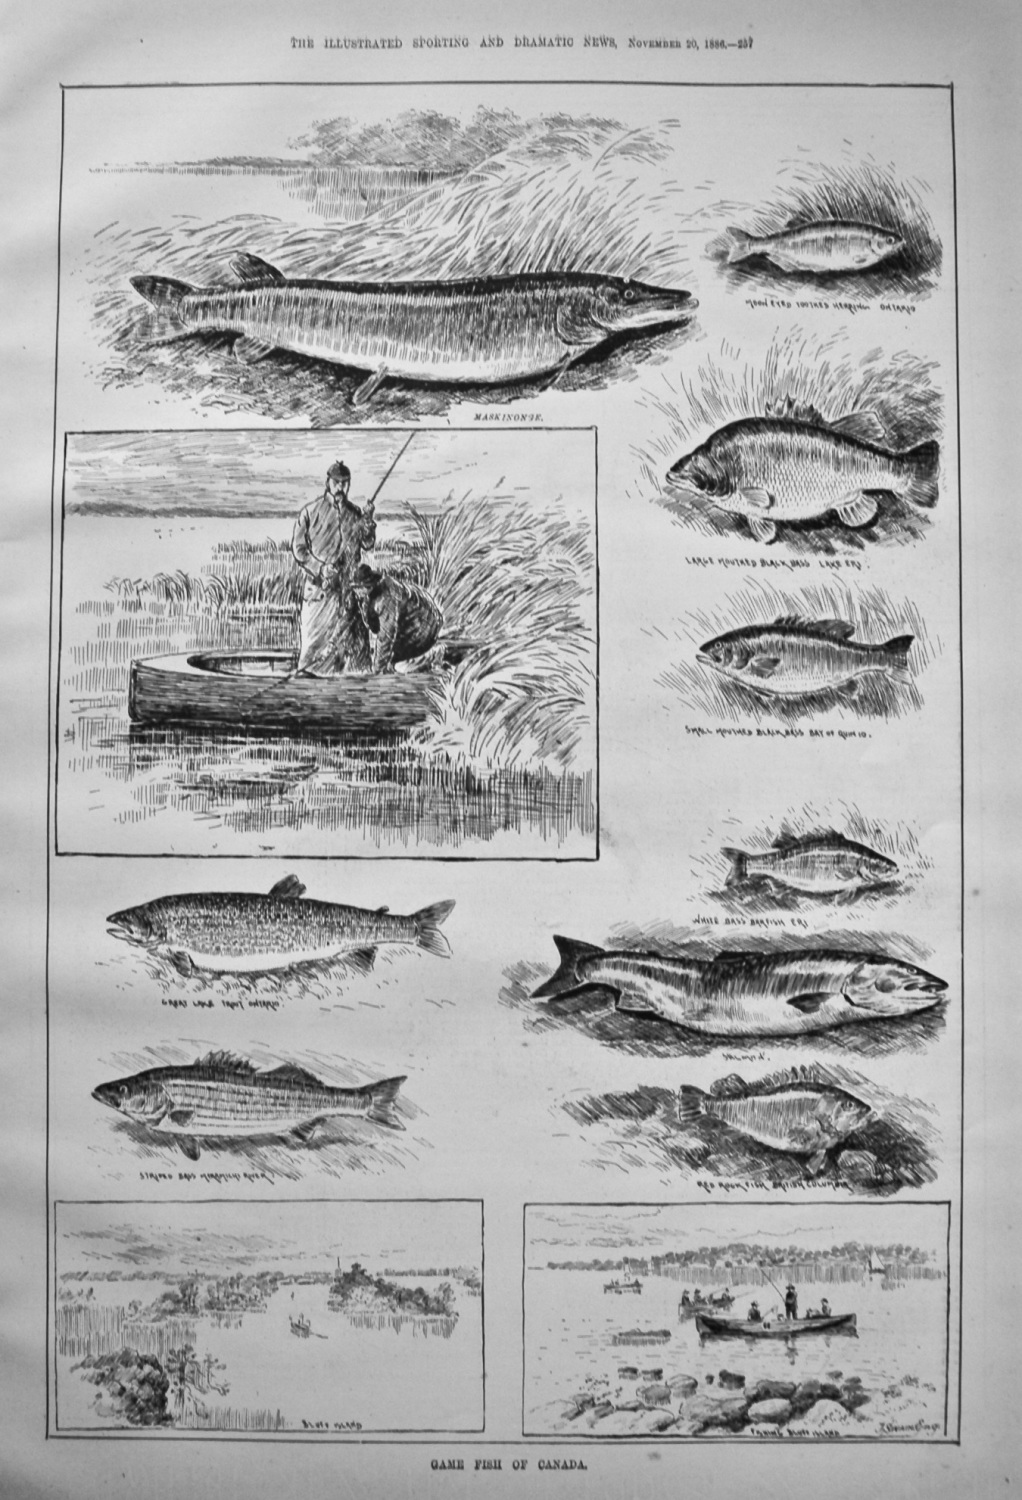 Game Fish of Canada. 1886